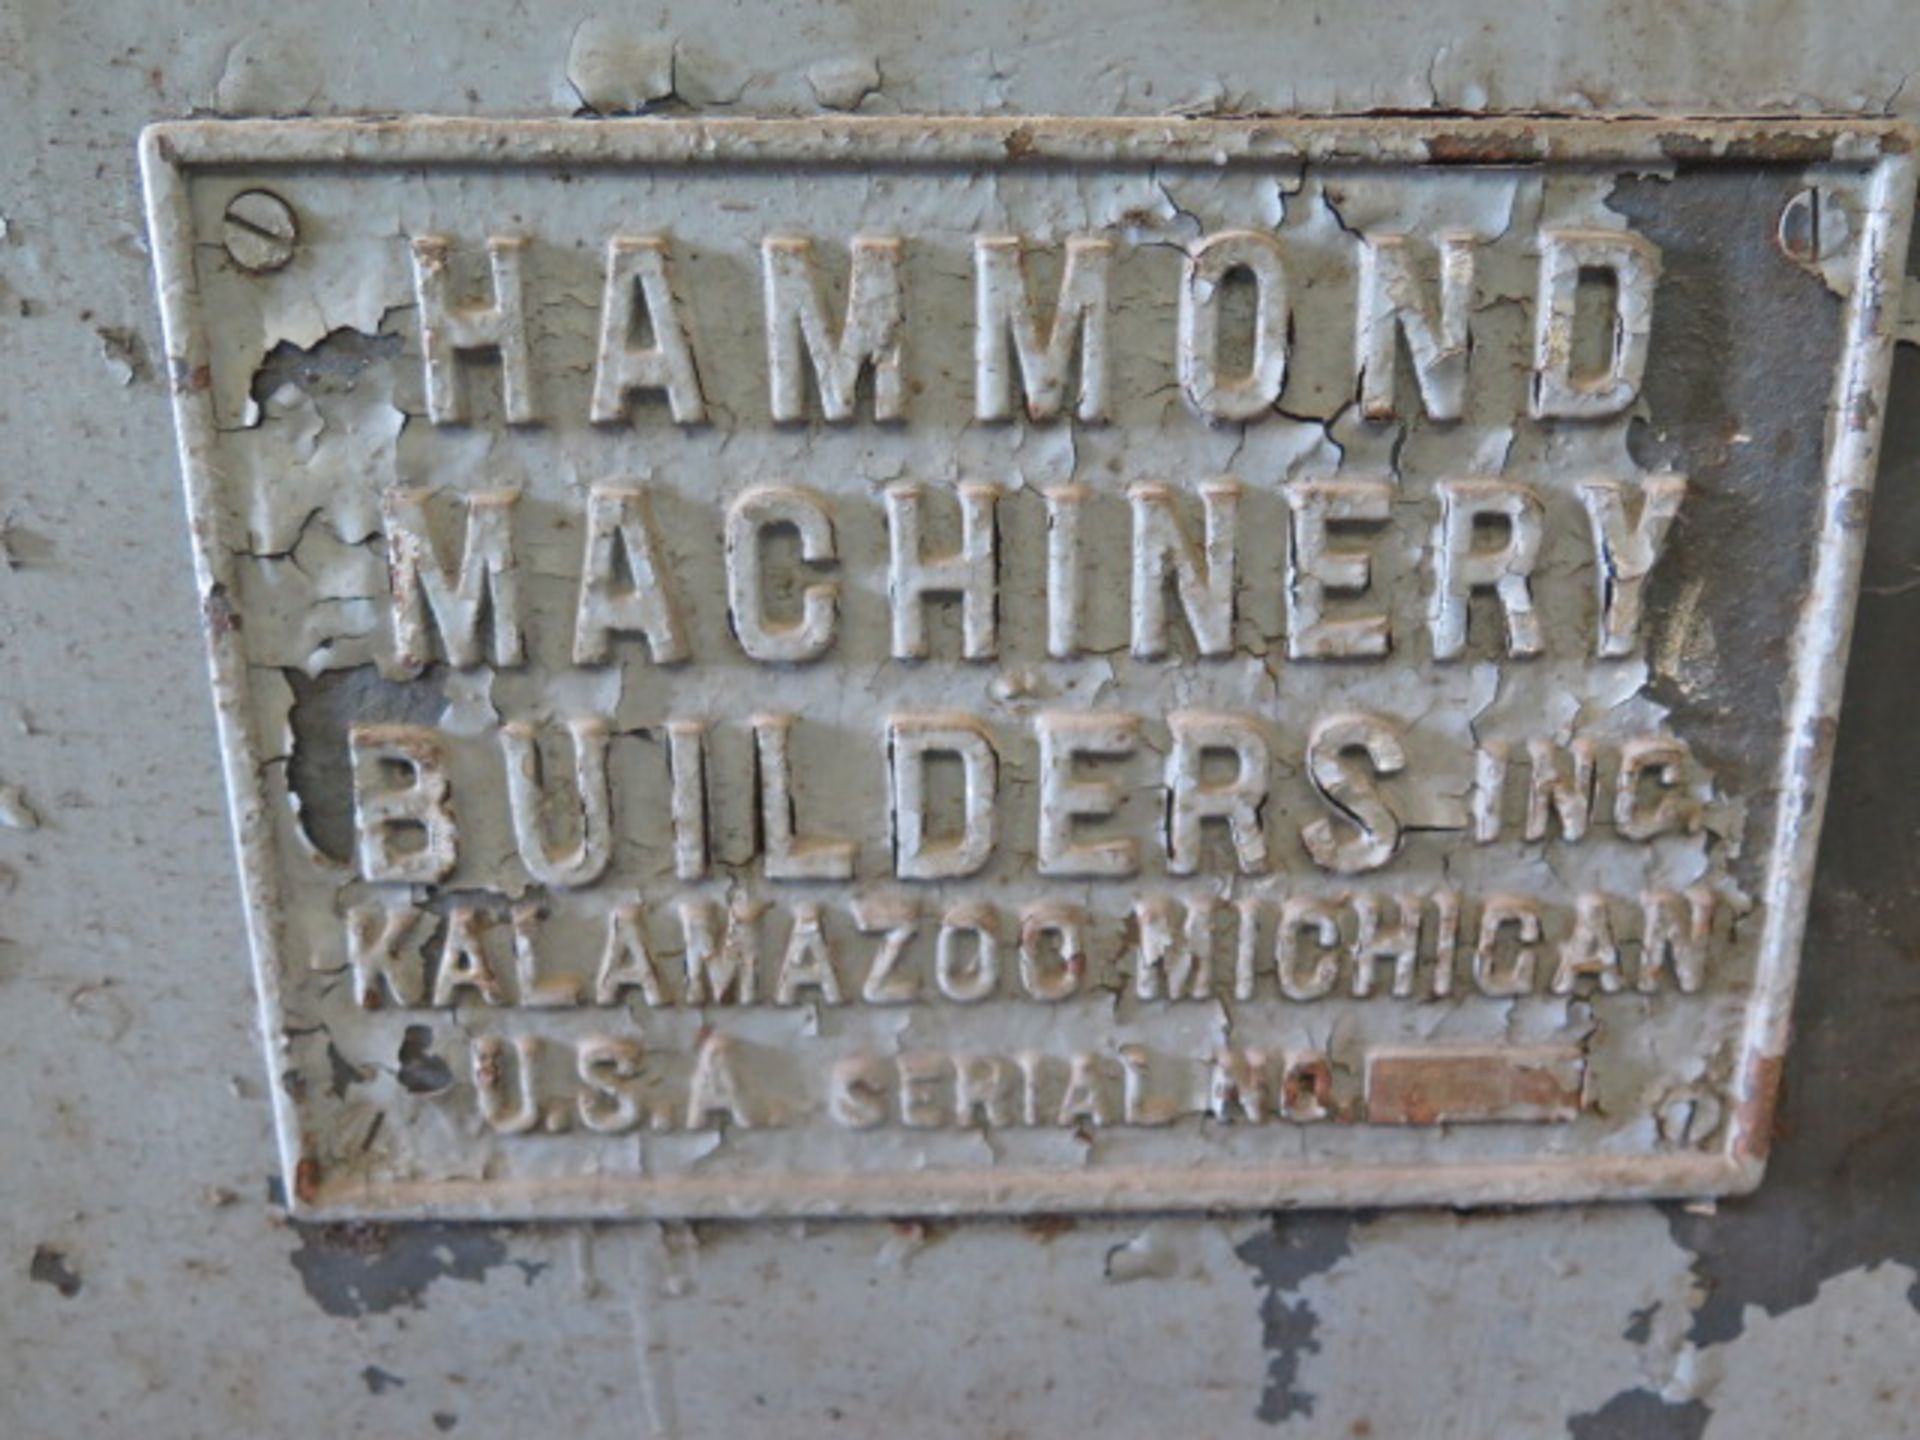 Hammond mdl.v 14 Tool Grinder (SOLD AS-IS - NO WARRANTY) - Image 7 of 8